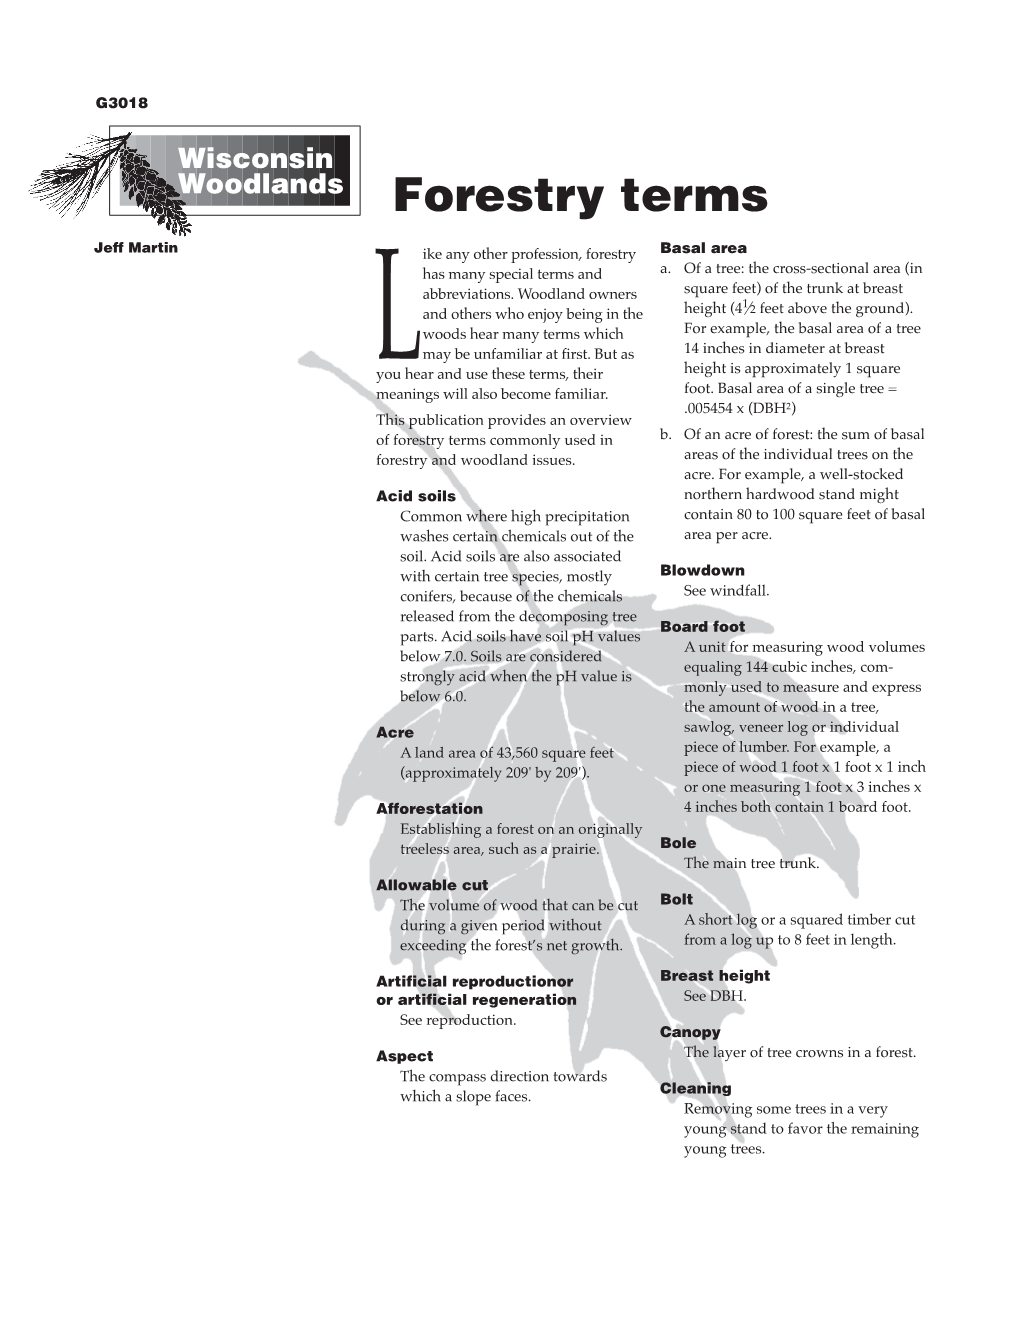 Wisconsin Woodlands: Forestry Terms R-08-97-2M-100